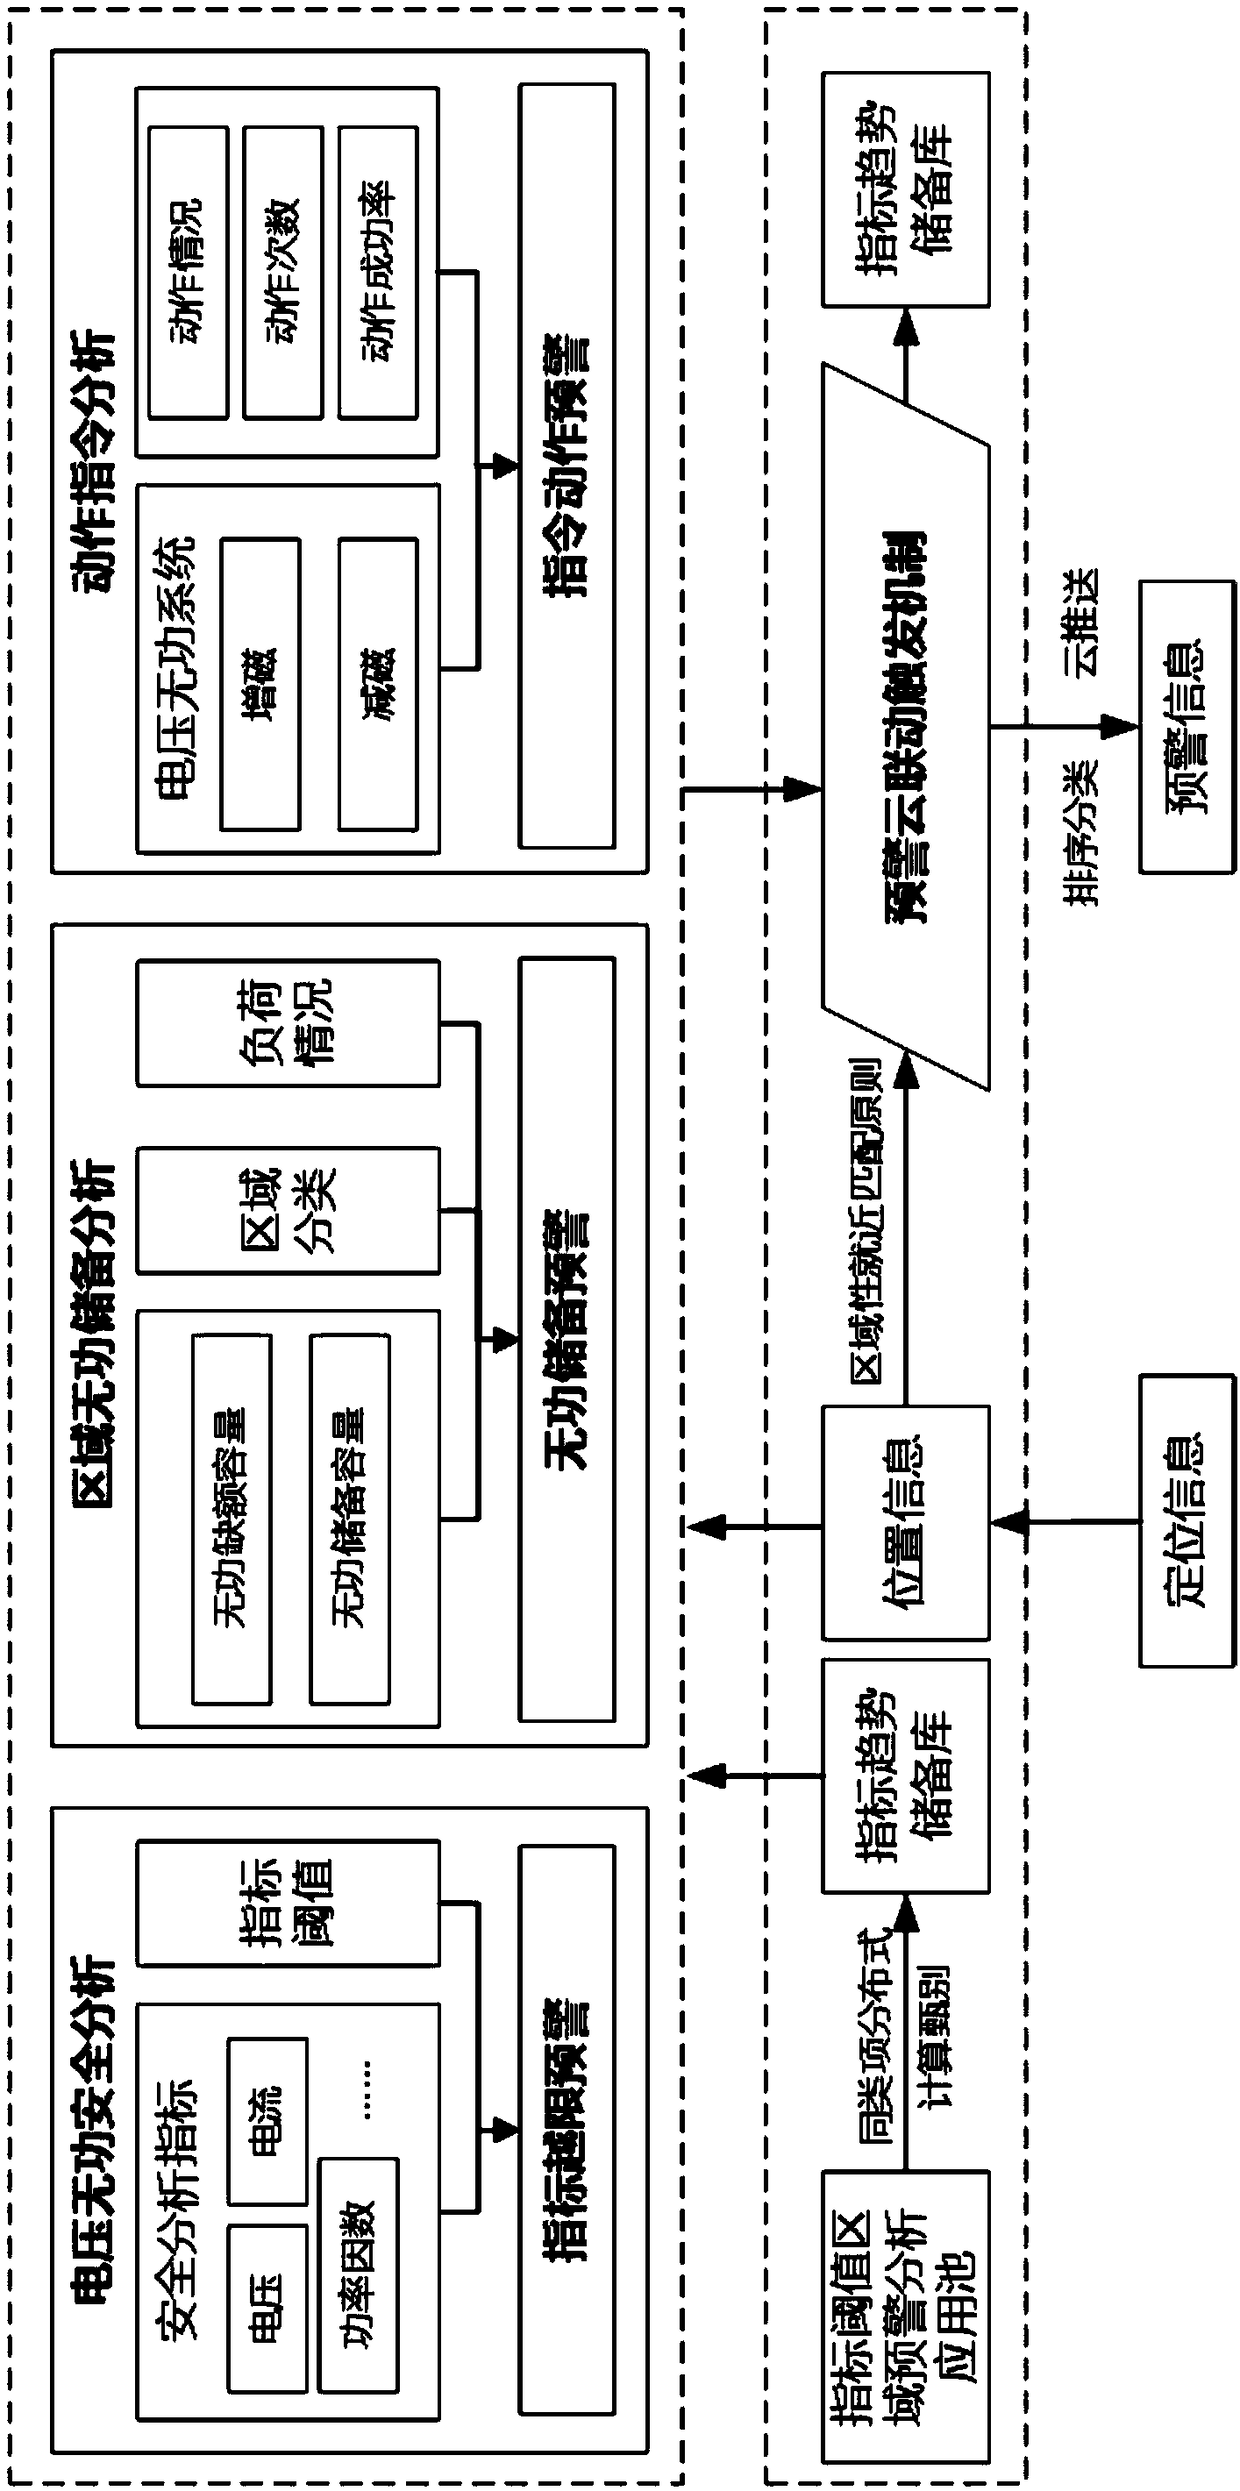 Voltage reactive power operation early warning method and system